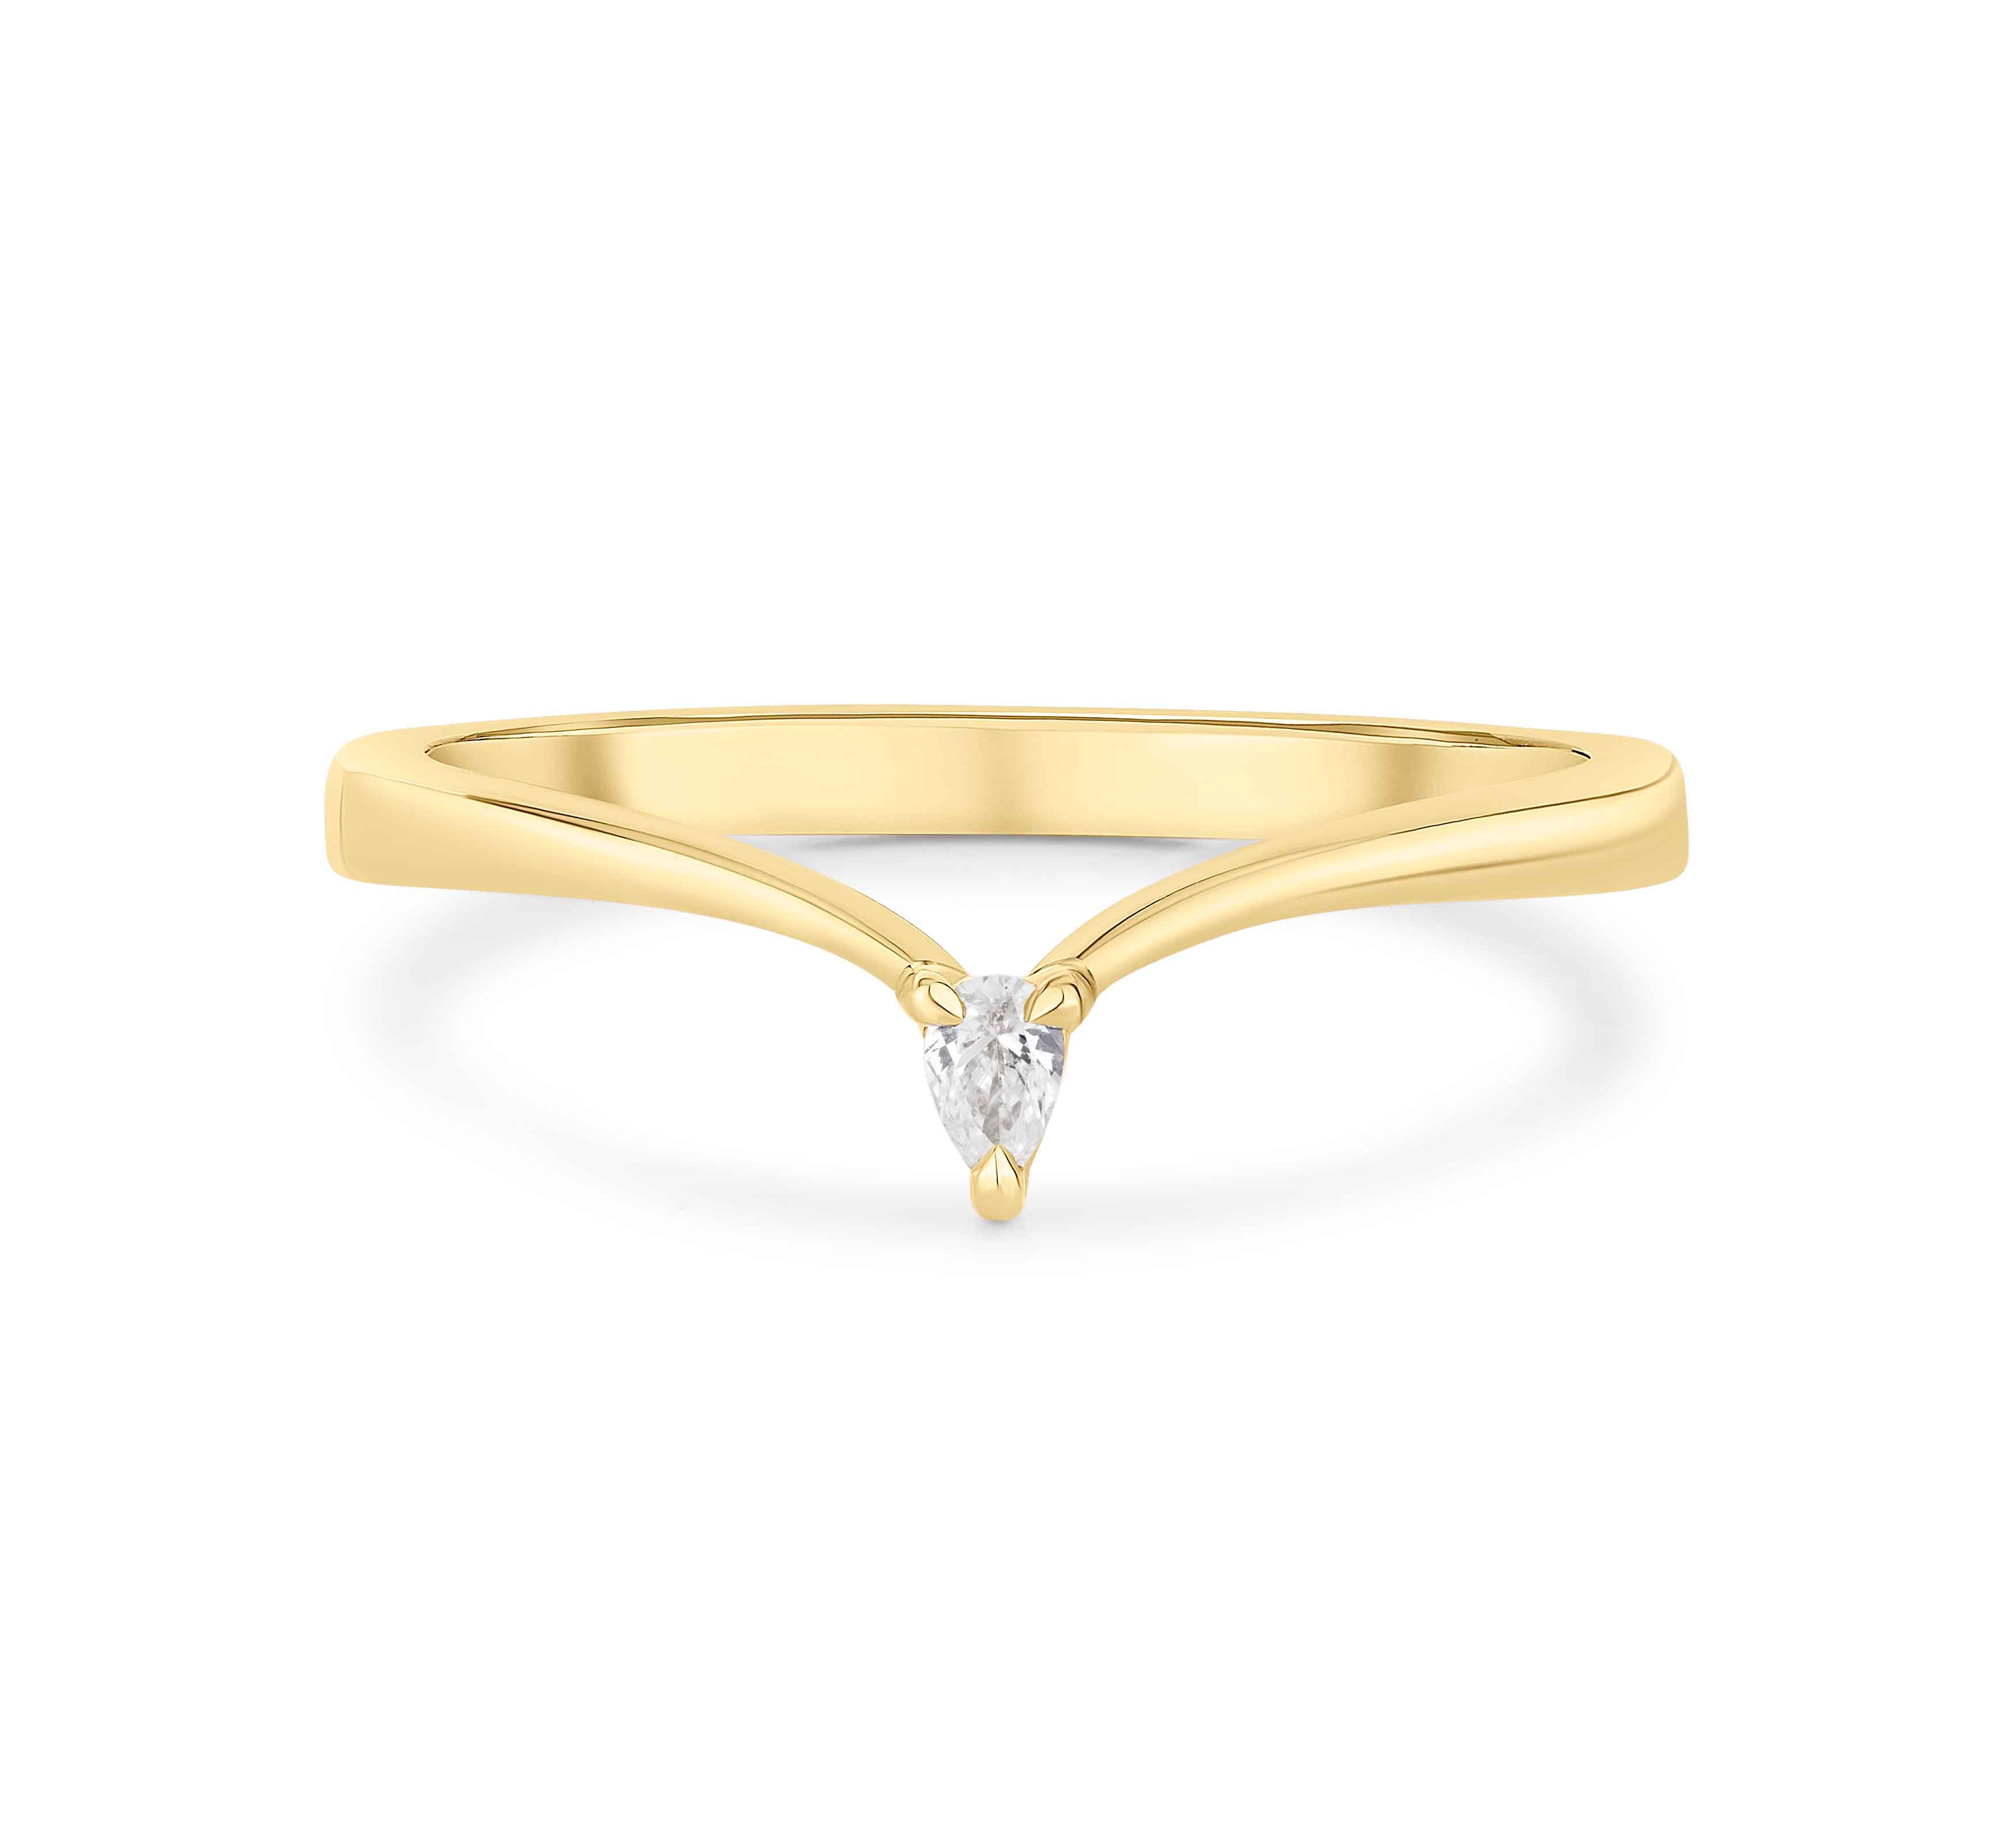 Moira Patience Fine Jewellery V-shaped Pear Diamond Fitted Wedding Ring